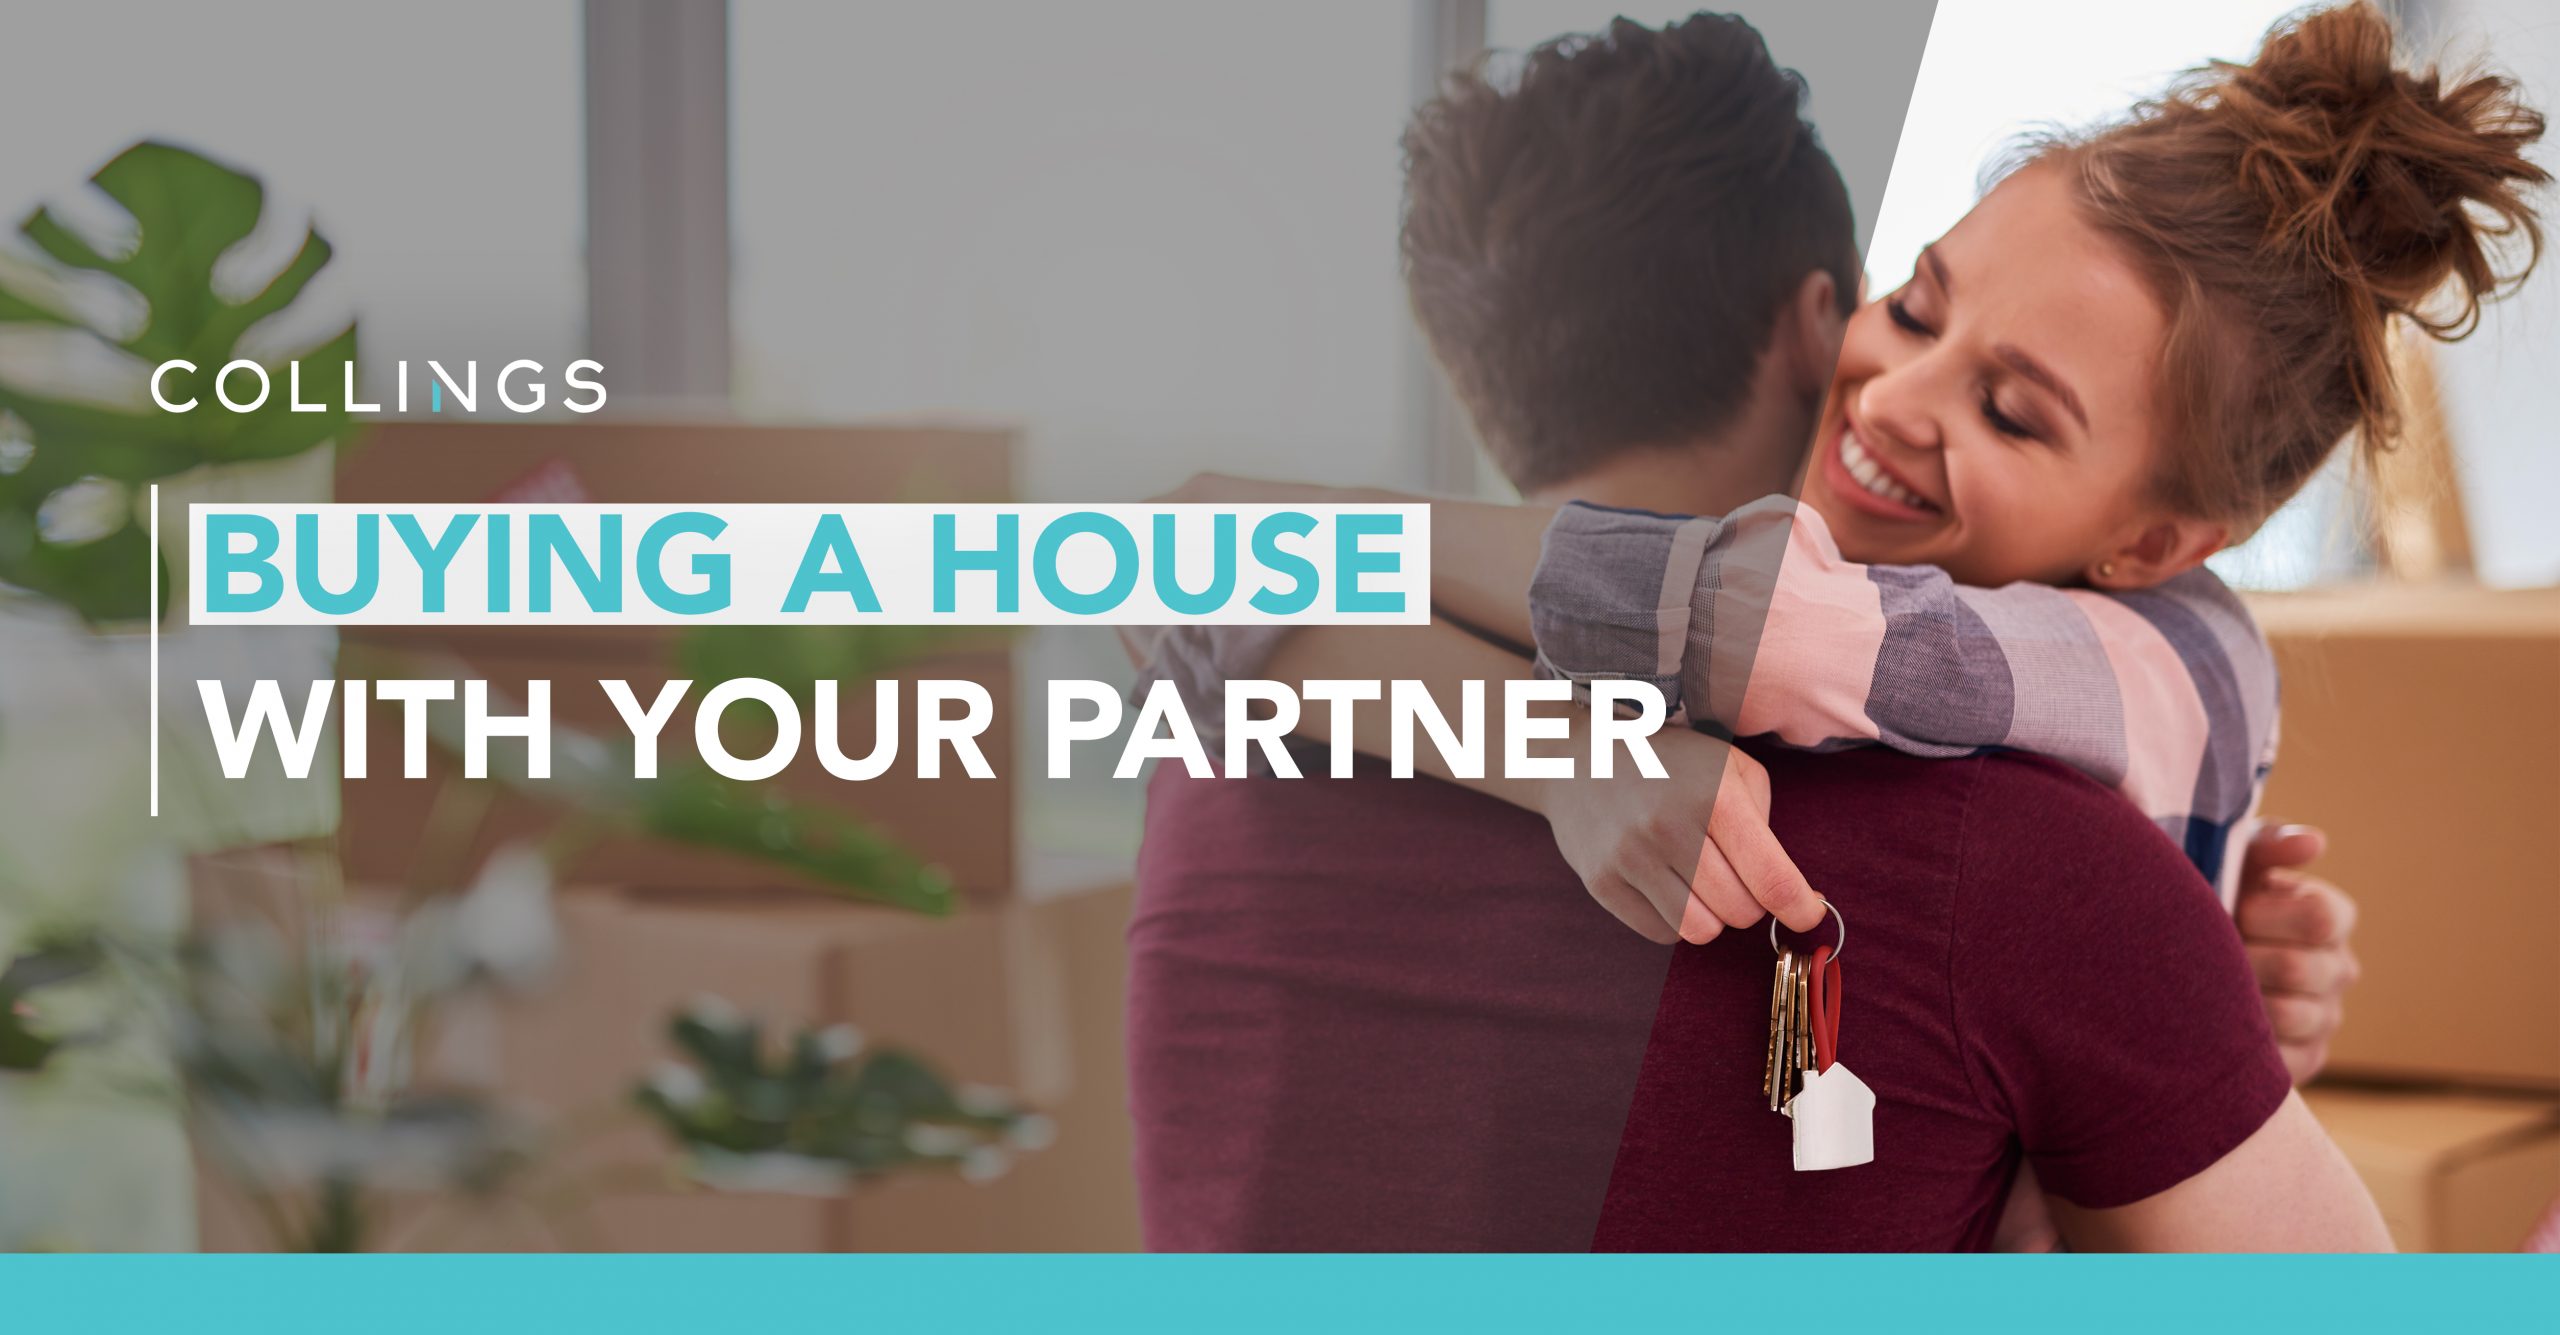 Buying a house with a partner